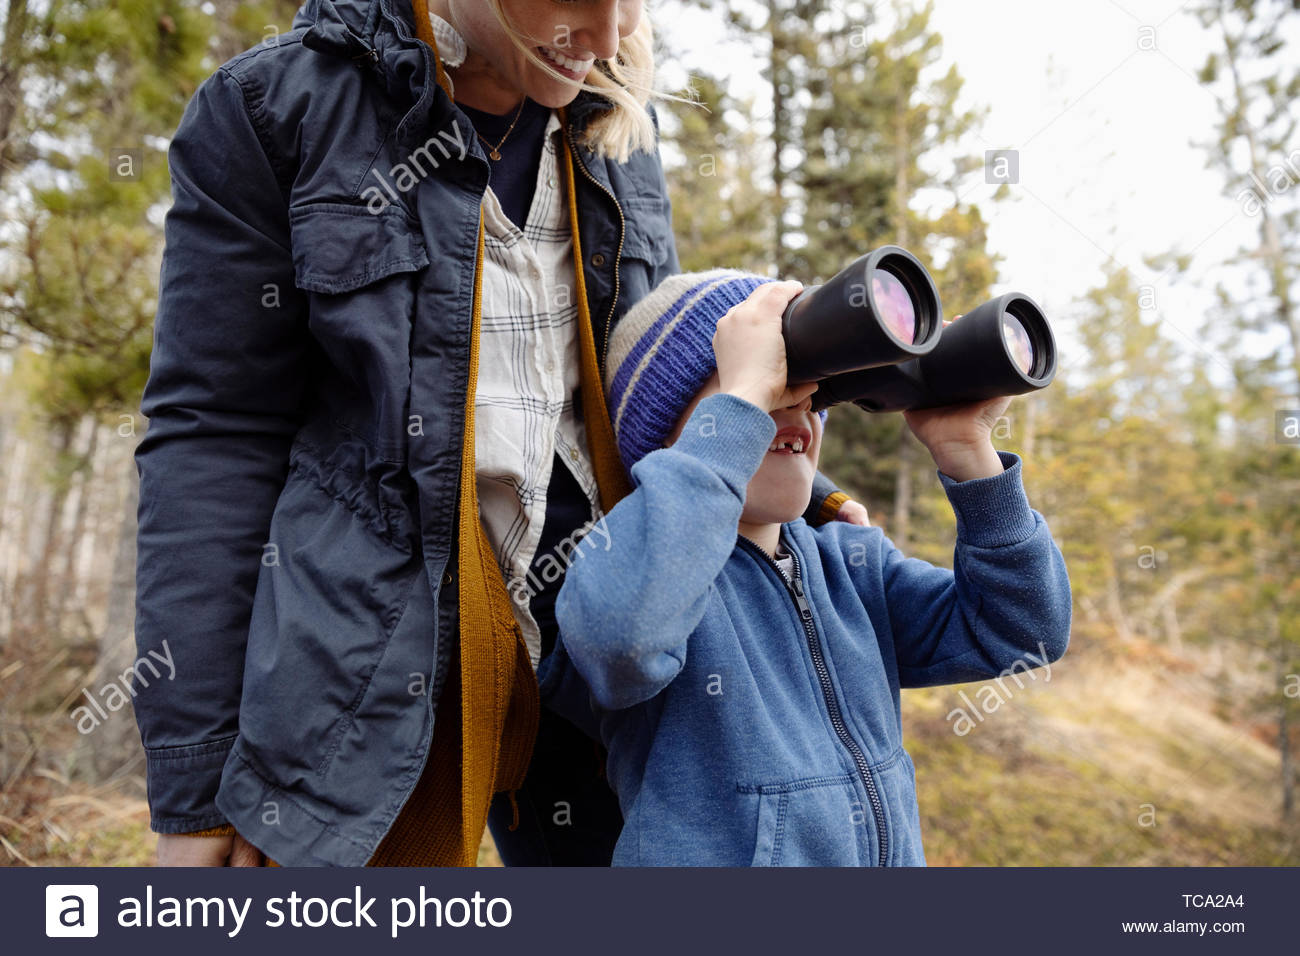 Mother and son with binoculars bird watching, hiking in woods Stock Photo